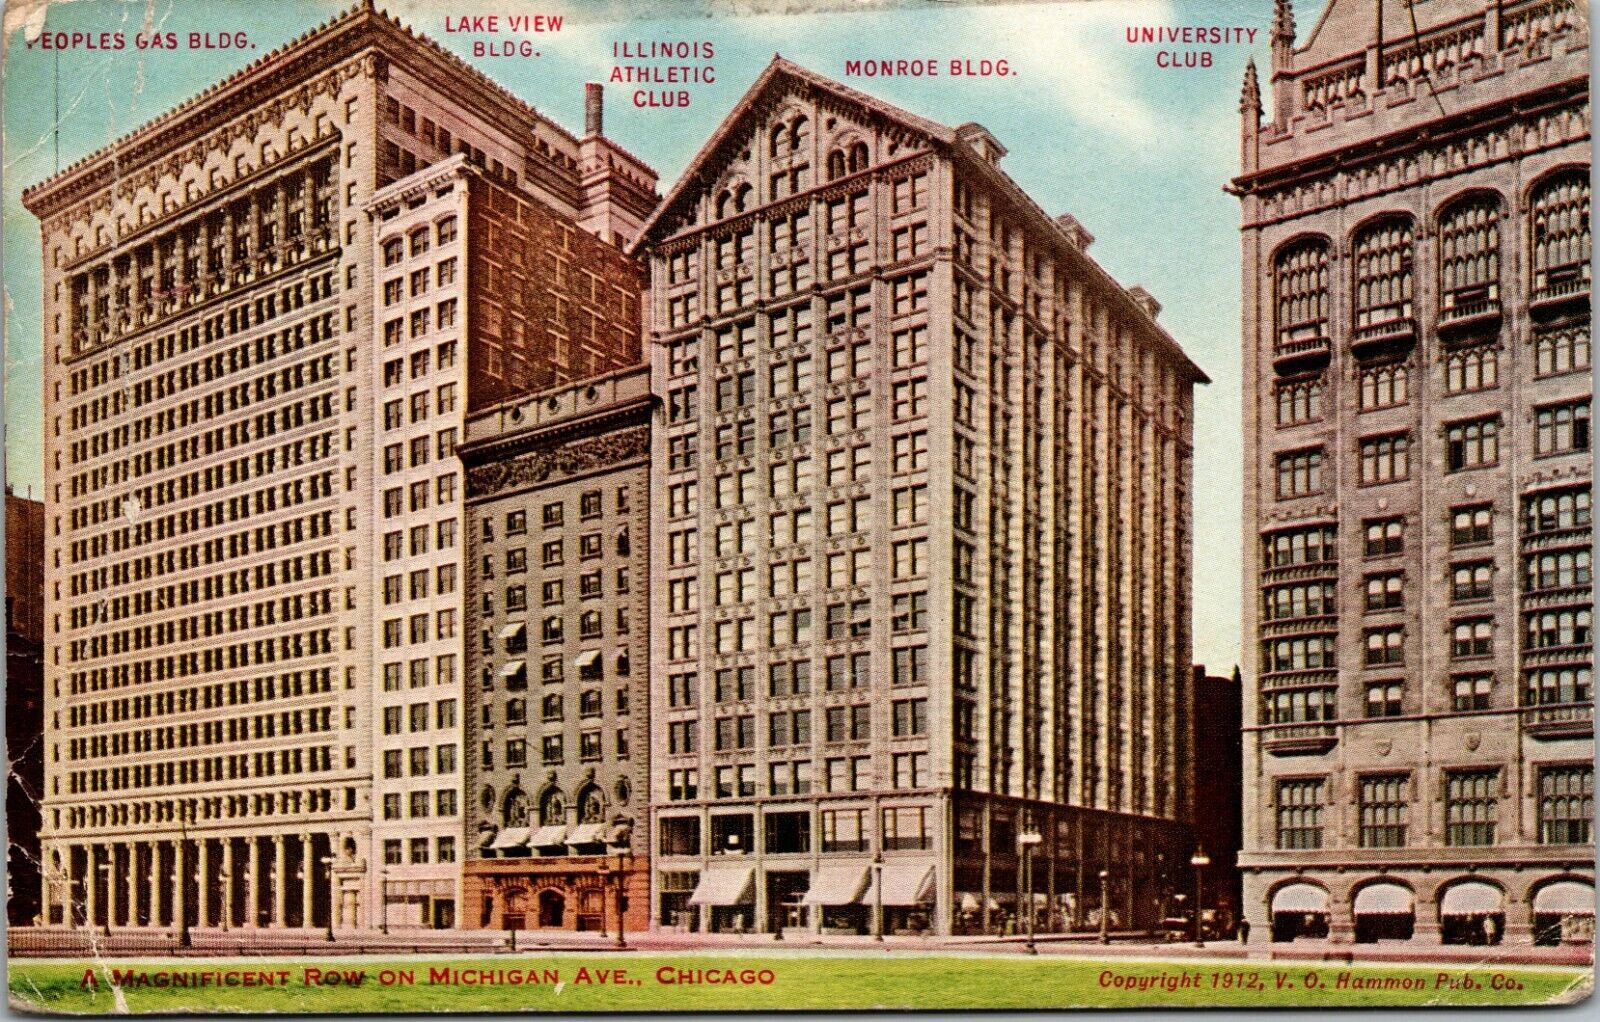 1915 Postcard - A Magnificent Row on Michigan Avenue, Chicago